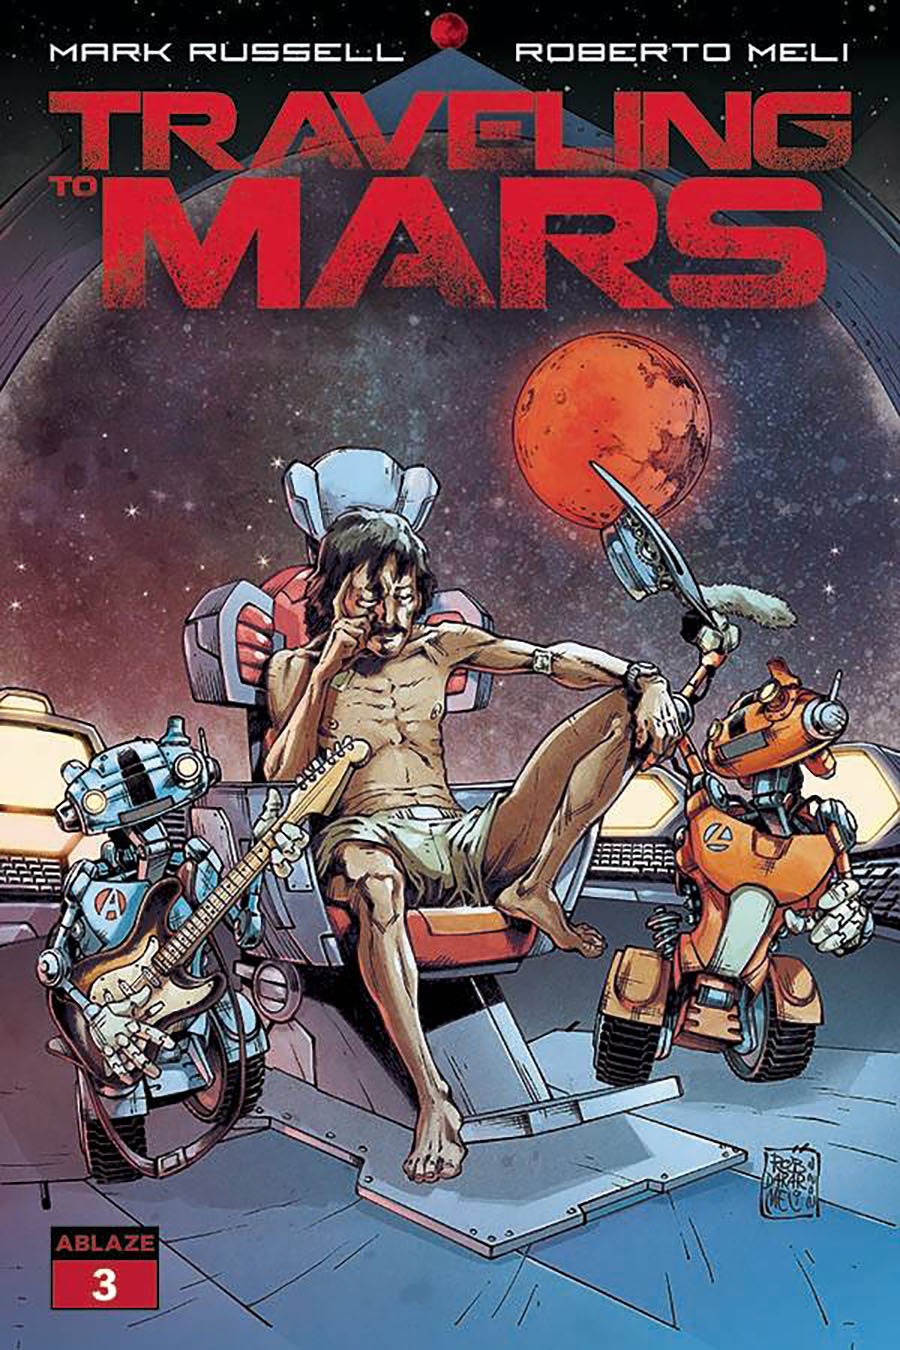 Traveling To Mars #3 Cover A Regular Roberto Meli Cover